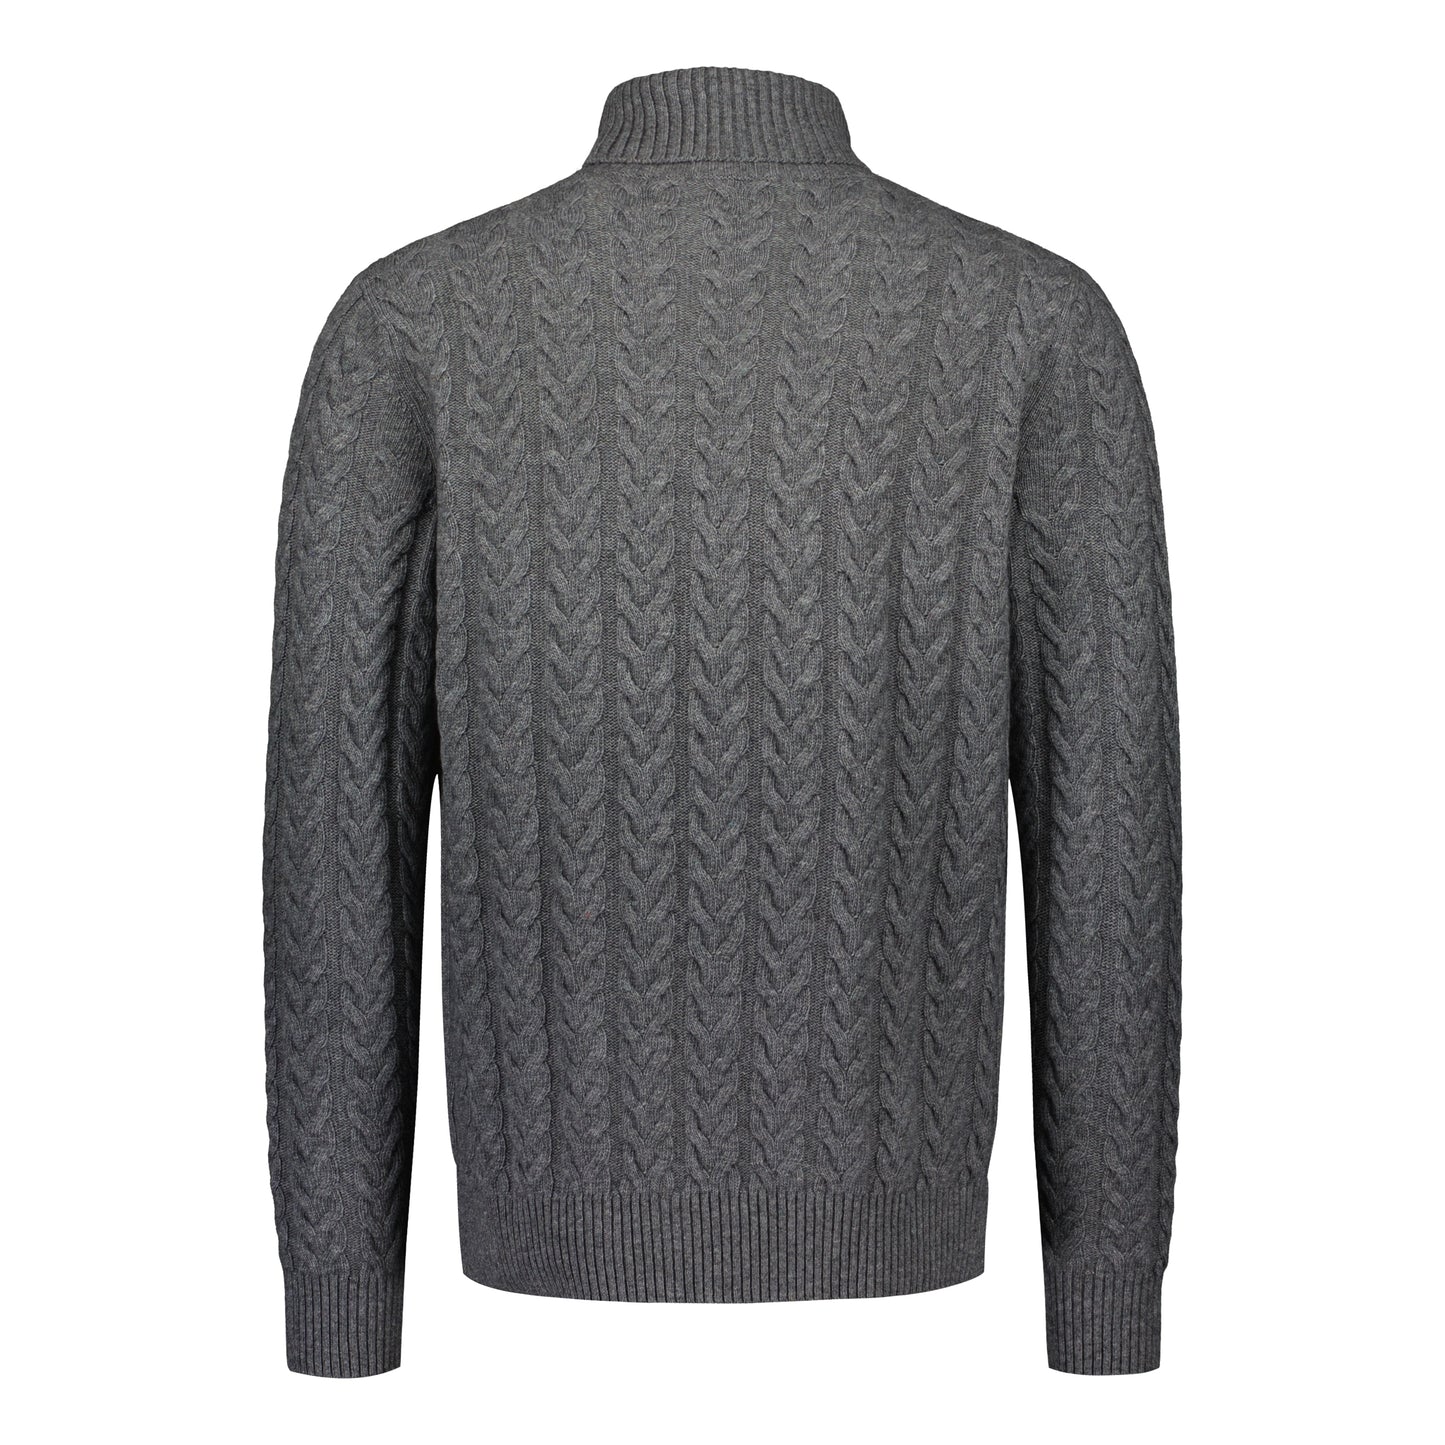 Rollneck Chunky Cable Grey